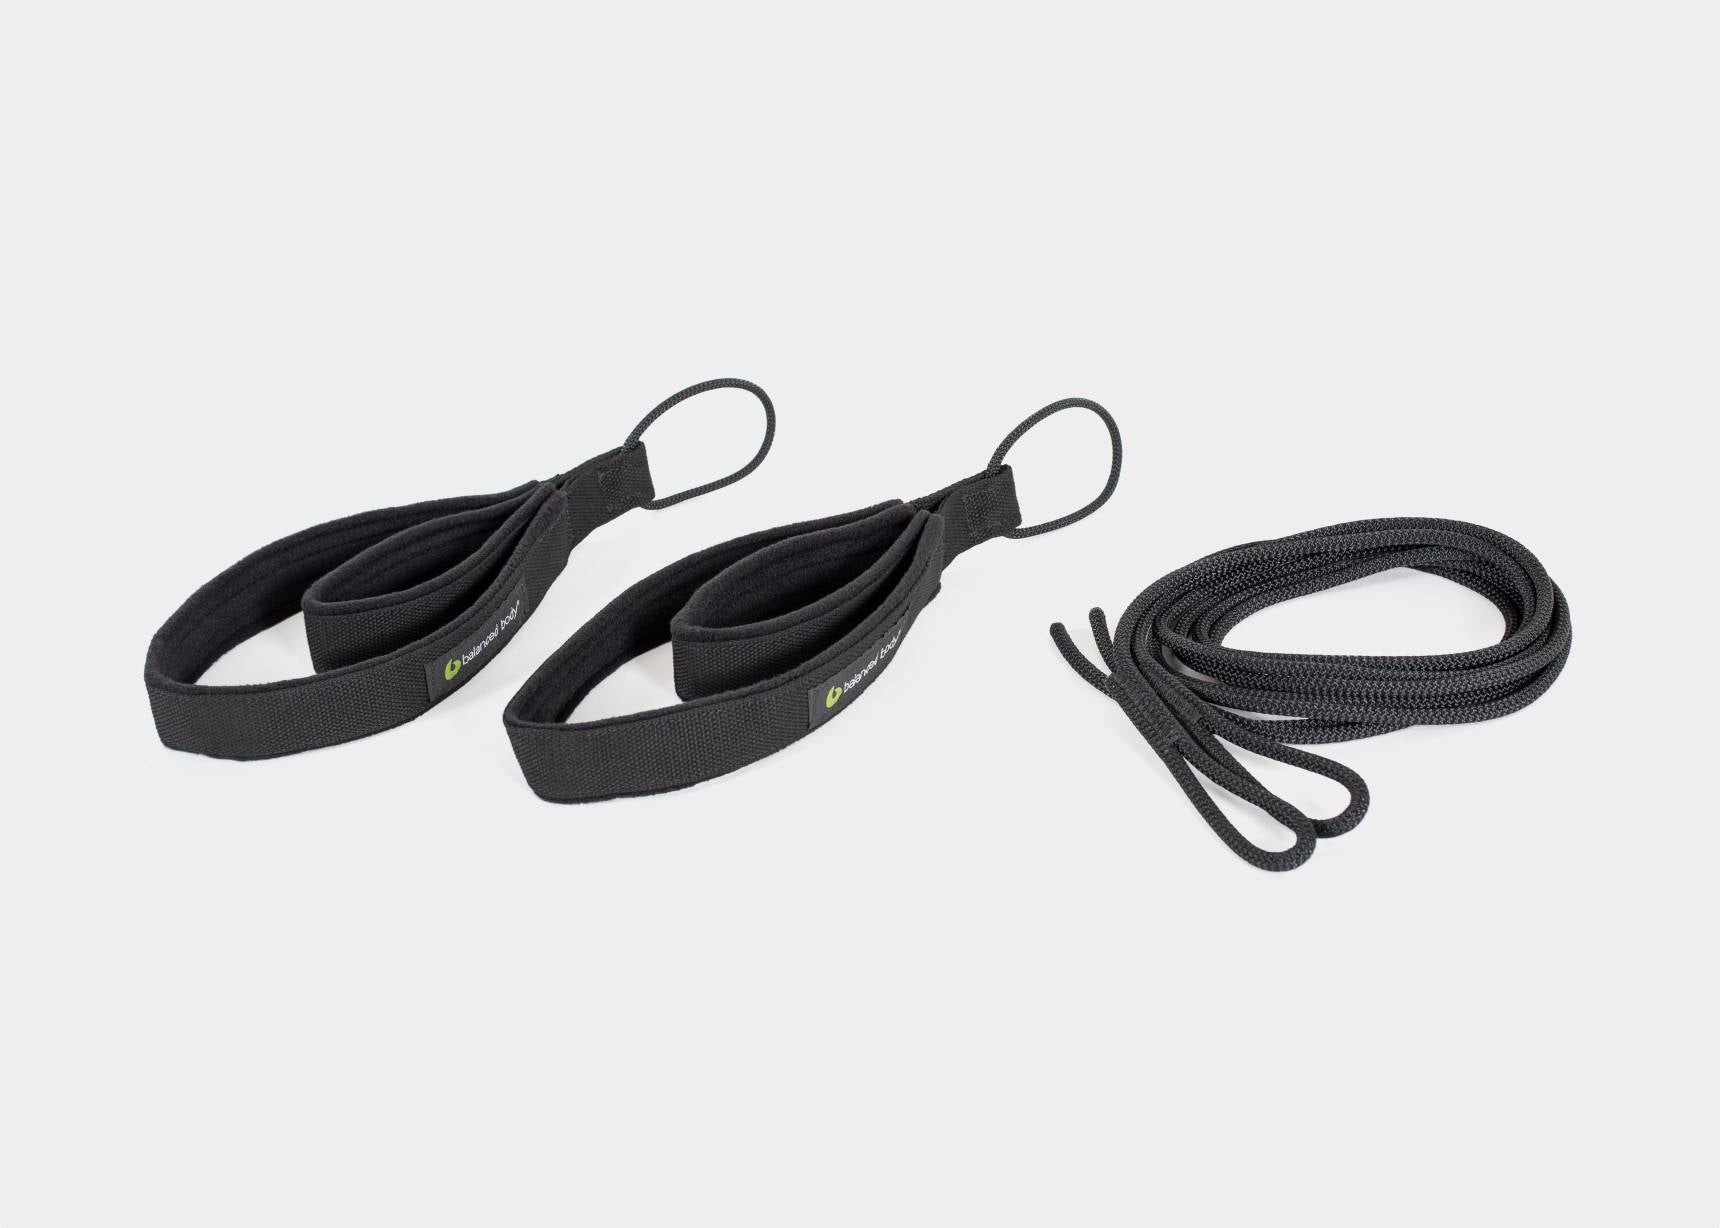 Yannee Pilates double loop straps for foot reformer fitness equipment straps  